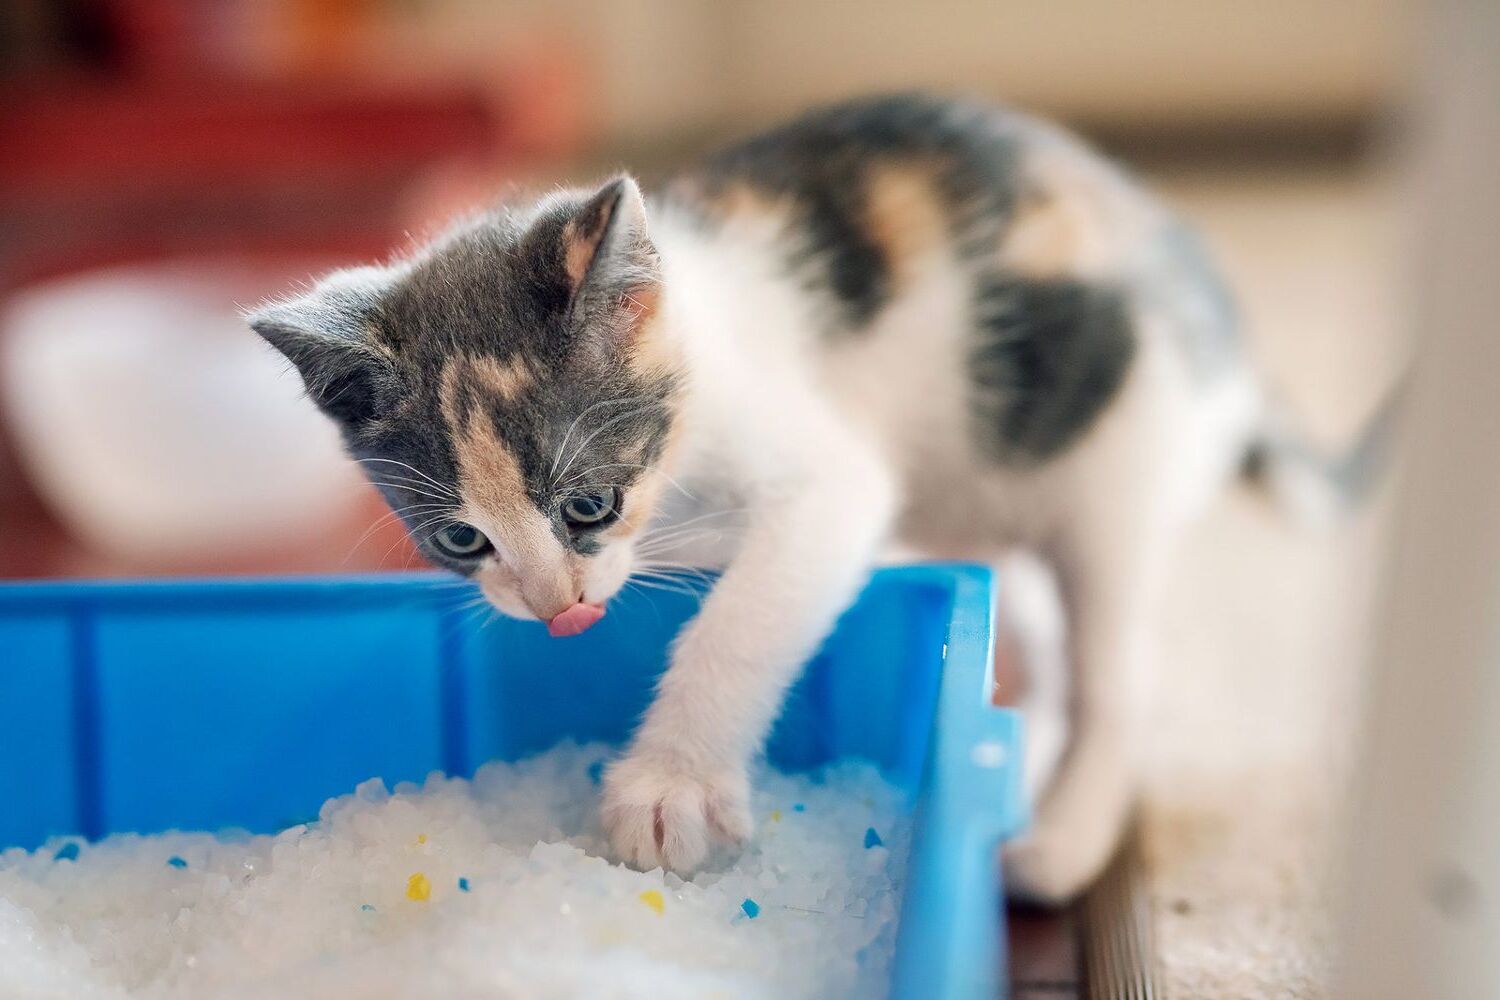 How Often Should A Cat Use The Litter Box?